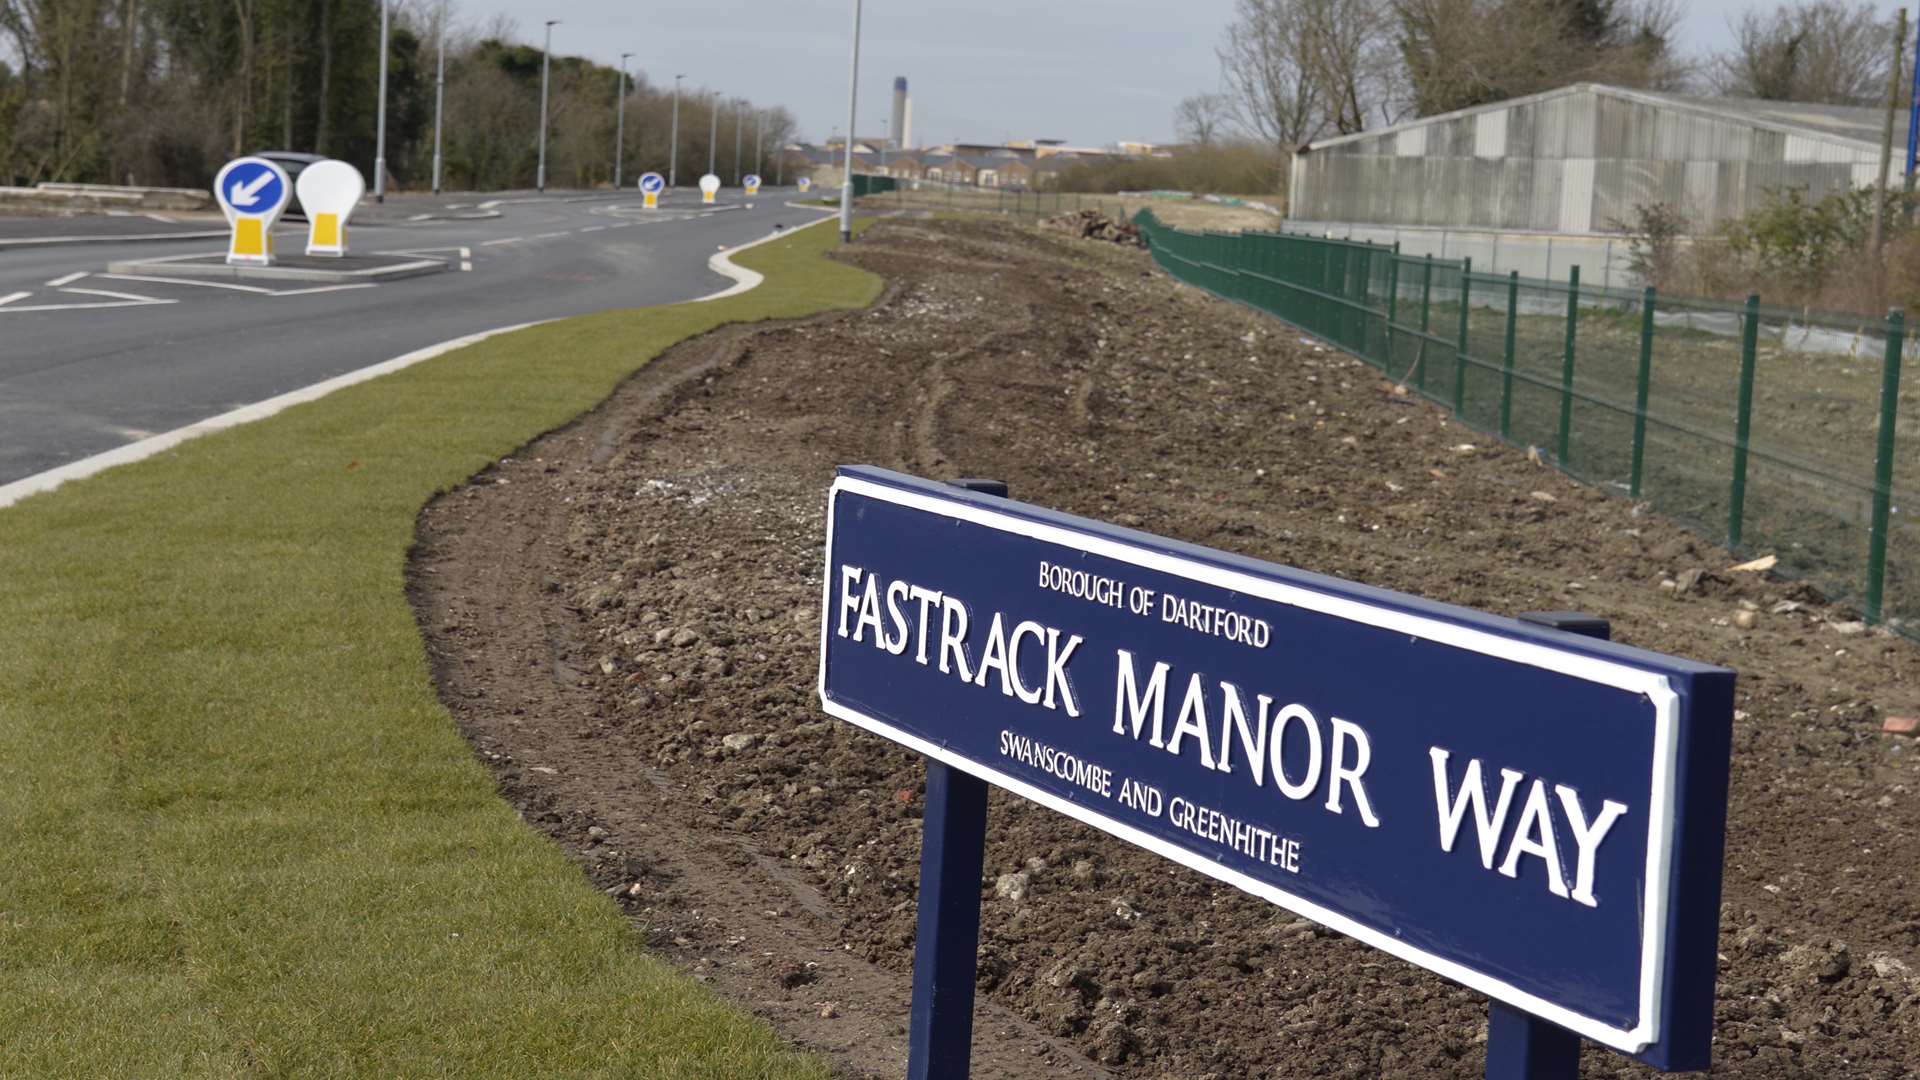 A campaign has been launched to rename Fastrack Manor Way after Claire Tiltman